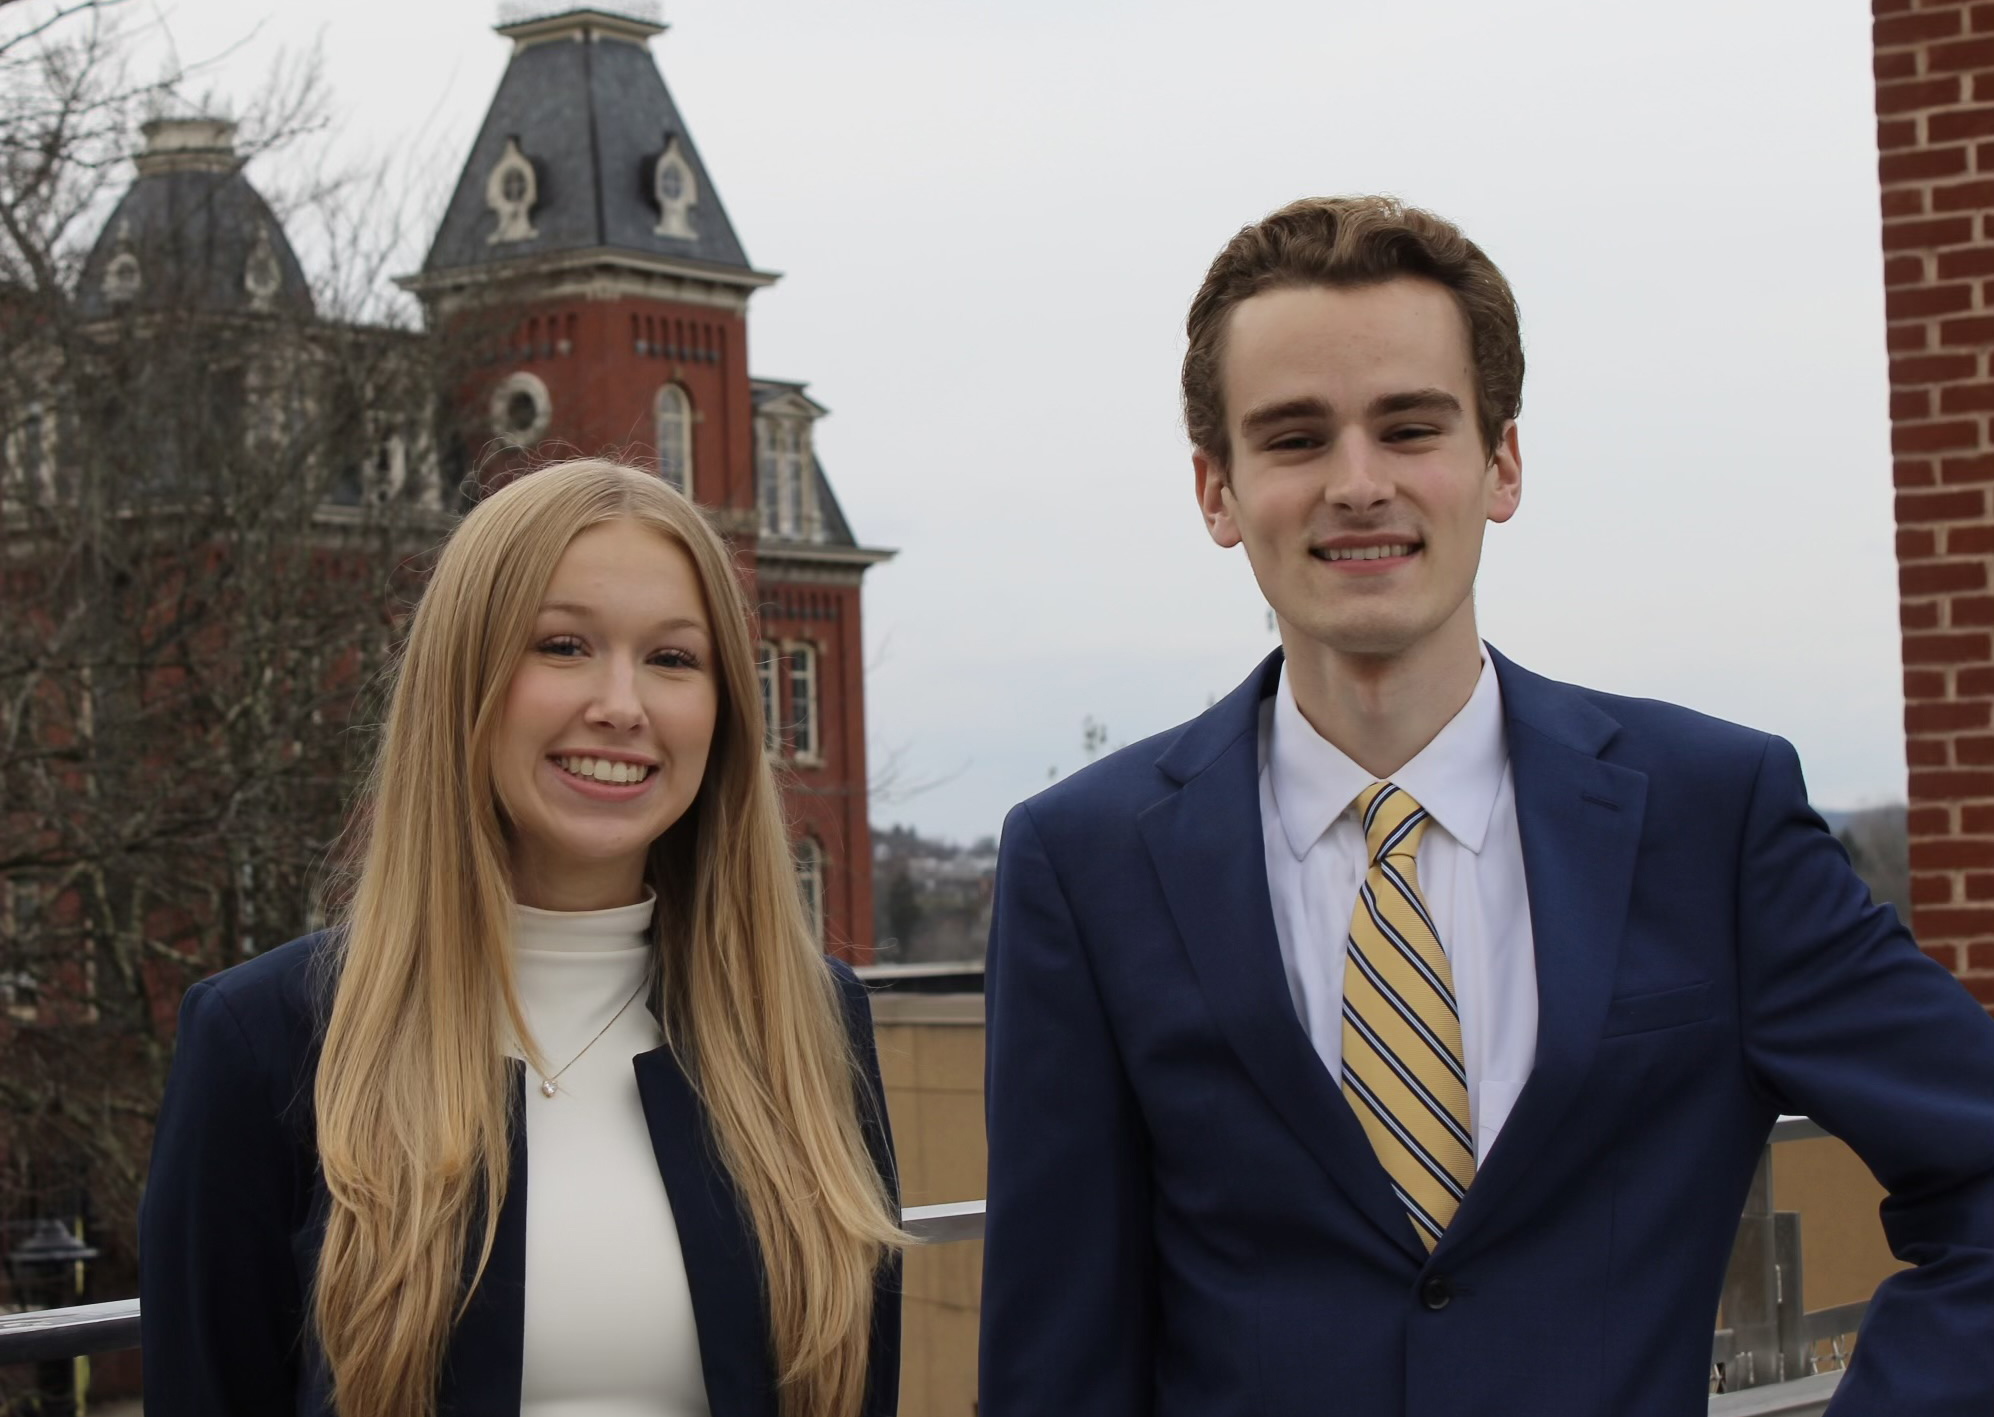 Article thumbnail for Long, Browning elected WVU Student Government Association leaders